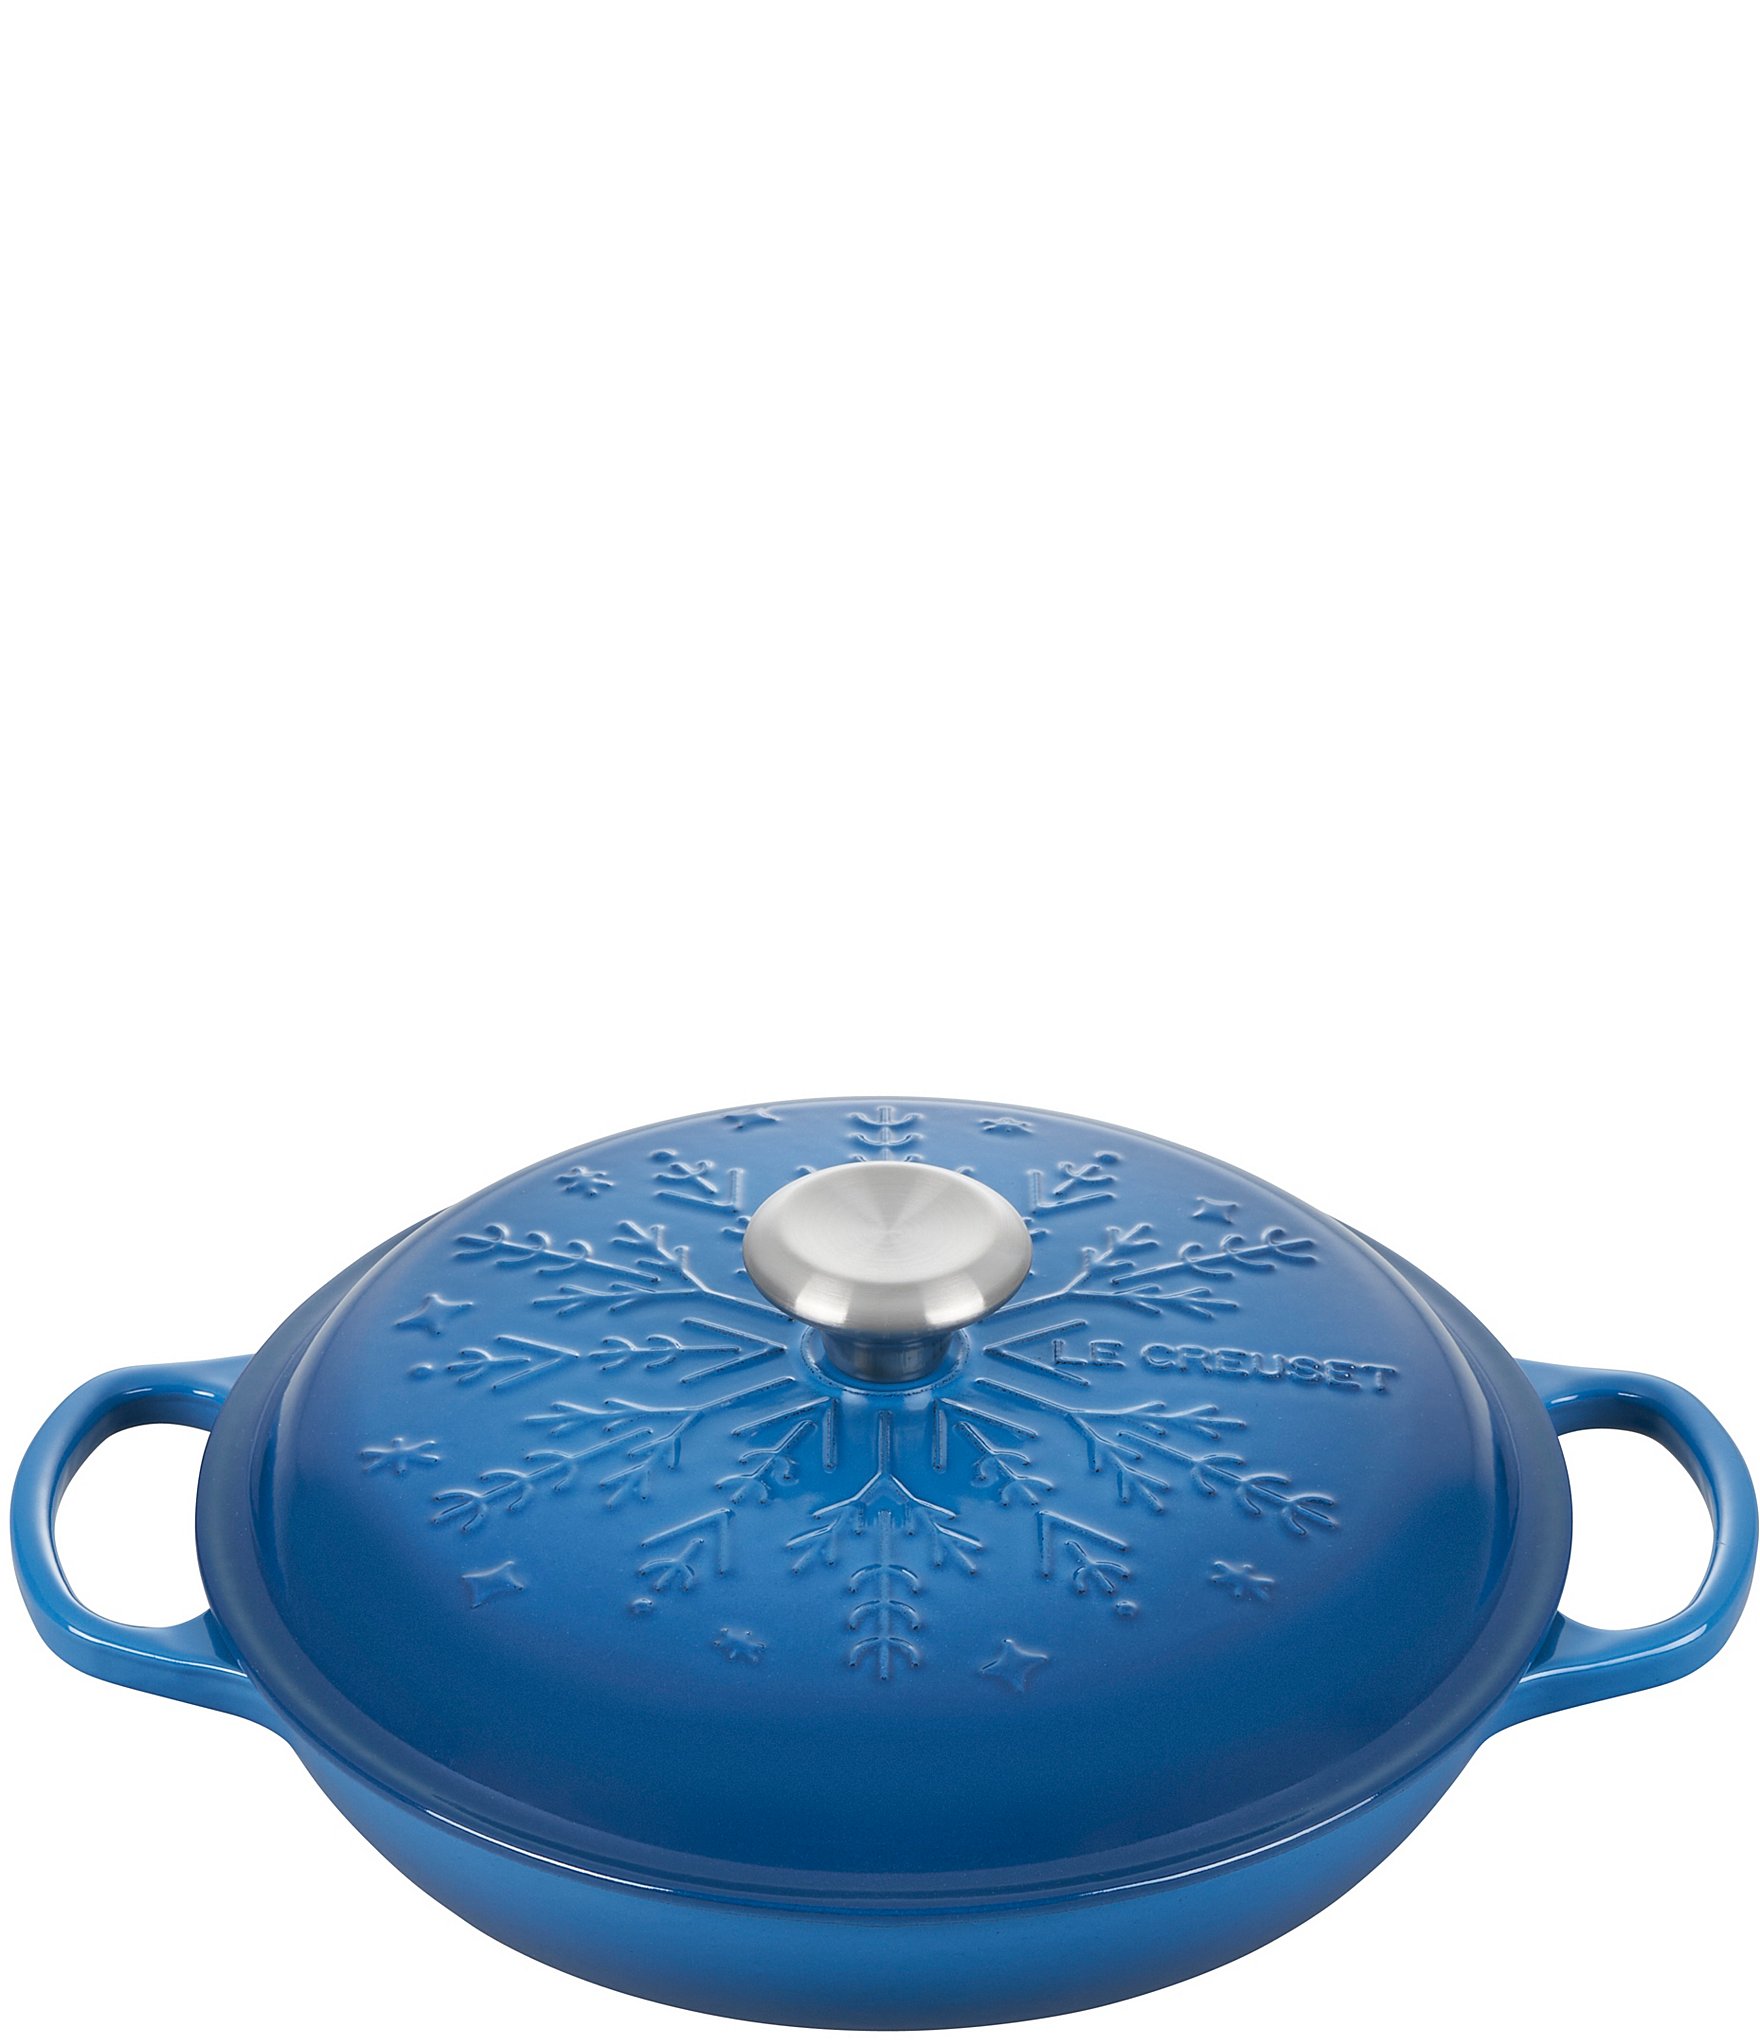 https://dimg.dillards.com/is/image/DillardsZoom/zoom/le-creuset-noel-collection-signature-2.25-qt-enameled-cast-iron-snowflake-braiser-with-stainless-steel-knob/00000000_zi_eed03d2a-bd67-43ed-99bb-cad438ba7ea0.jpg